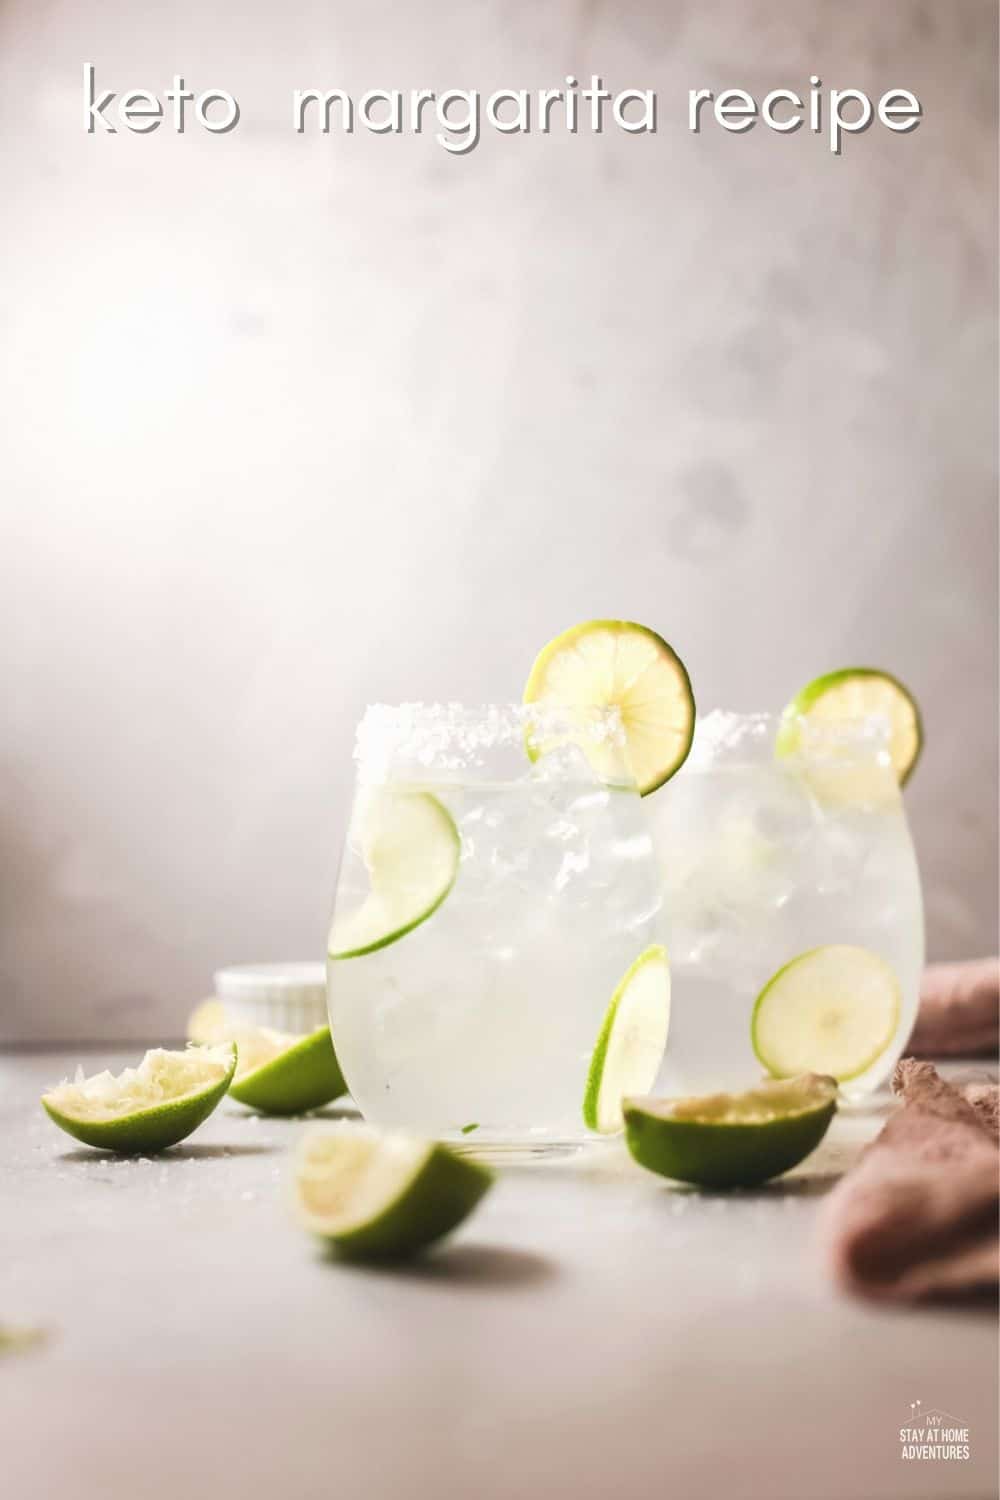 This is super refreshing and can be made in a pitcher. You will not worry about the amount of sugar in it. Keto Margarita will not disappoint you after all. via @mystayathome